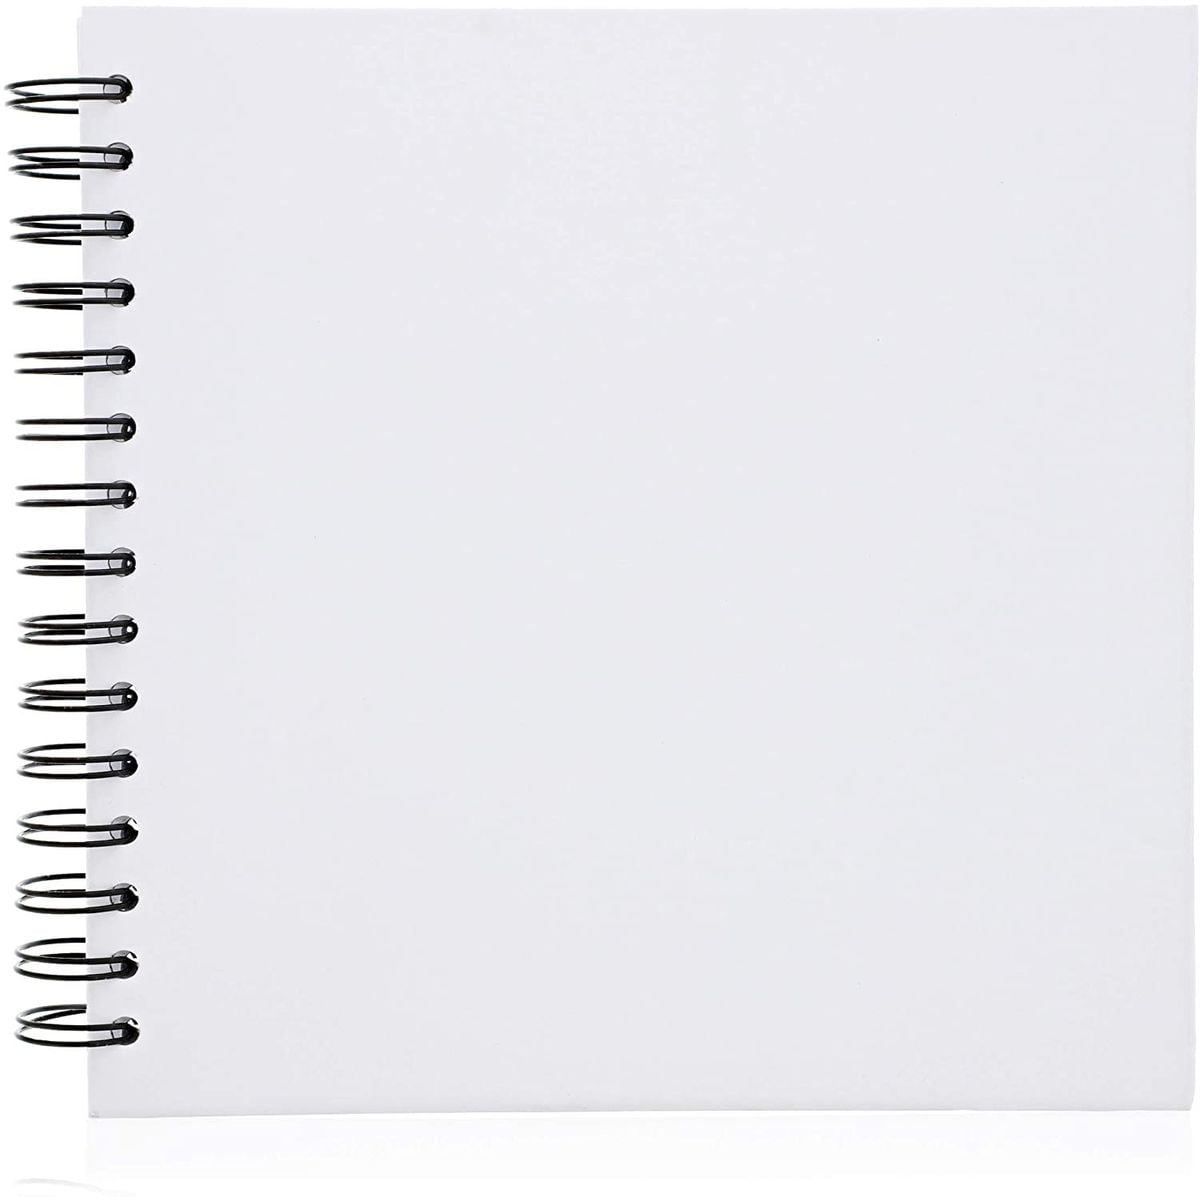 Ribbon Blank White Pages Scrapbook Traveling Photo Album A5